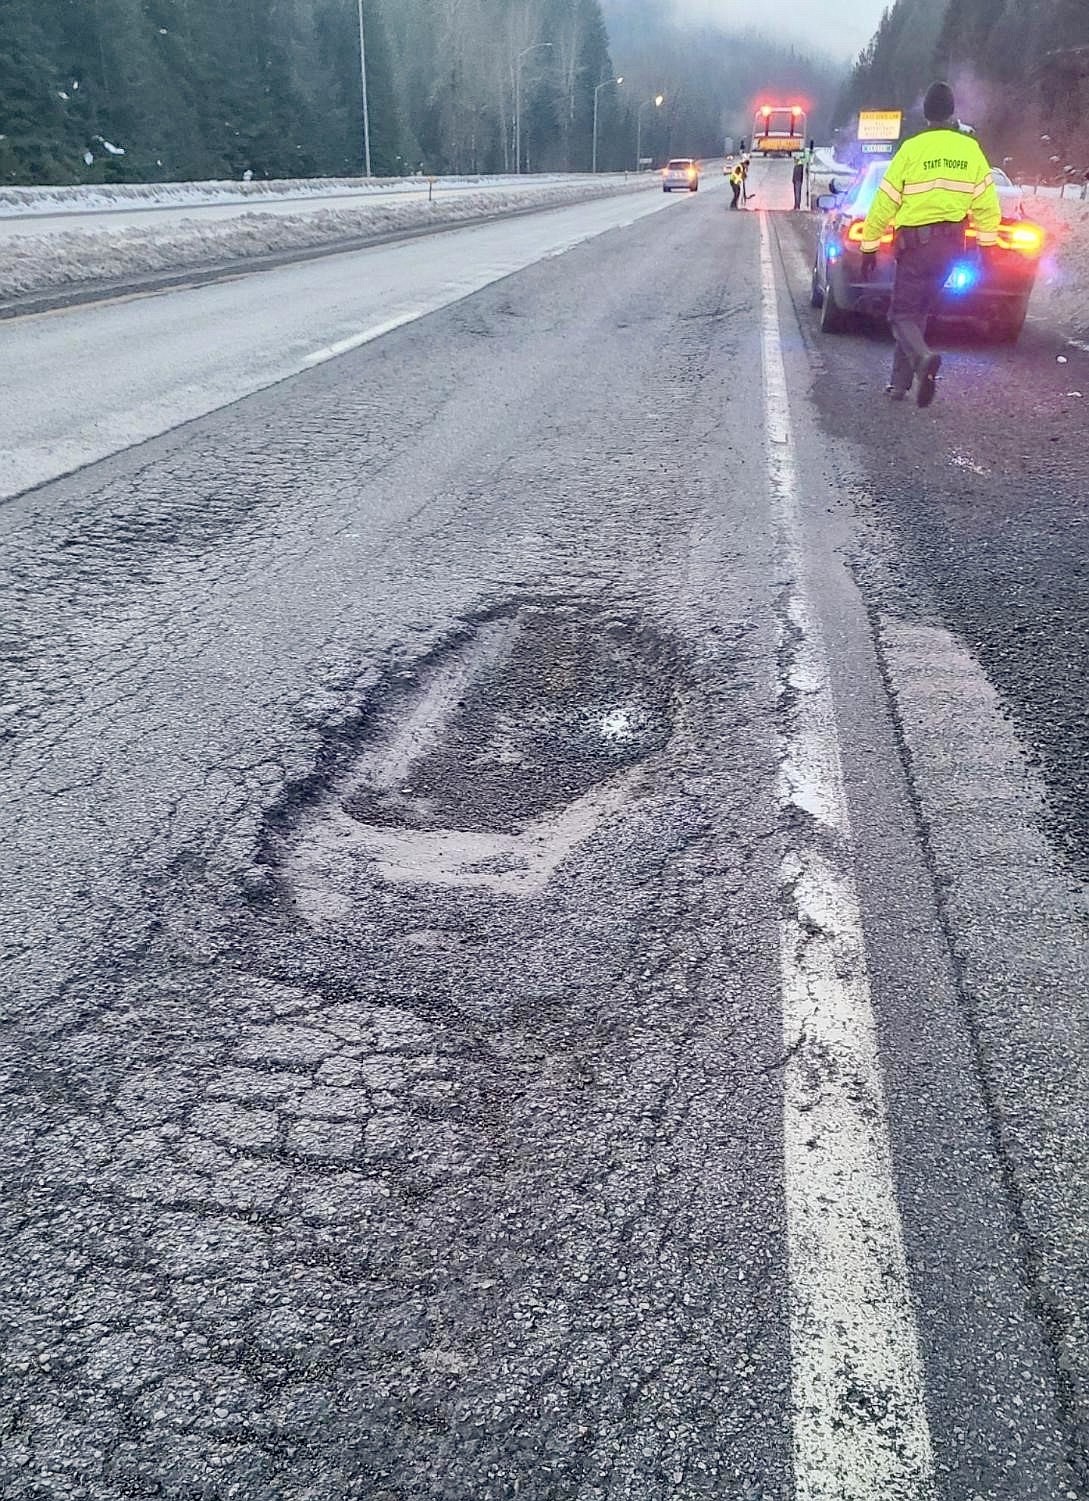 Idaho State Police respond to the I-90 closure at milepost 33 on Jan. 16 after a vehicle crossed into the work zone and crashed into a loader that was being used to fill potholes.